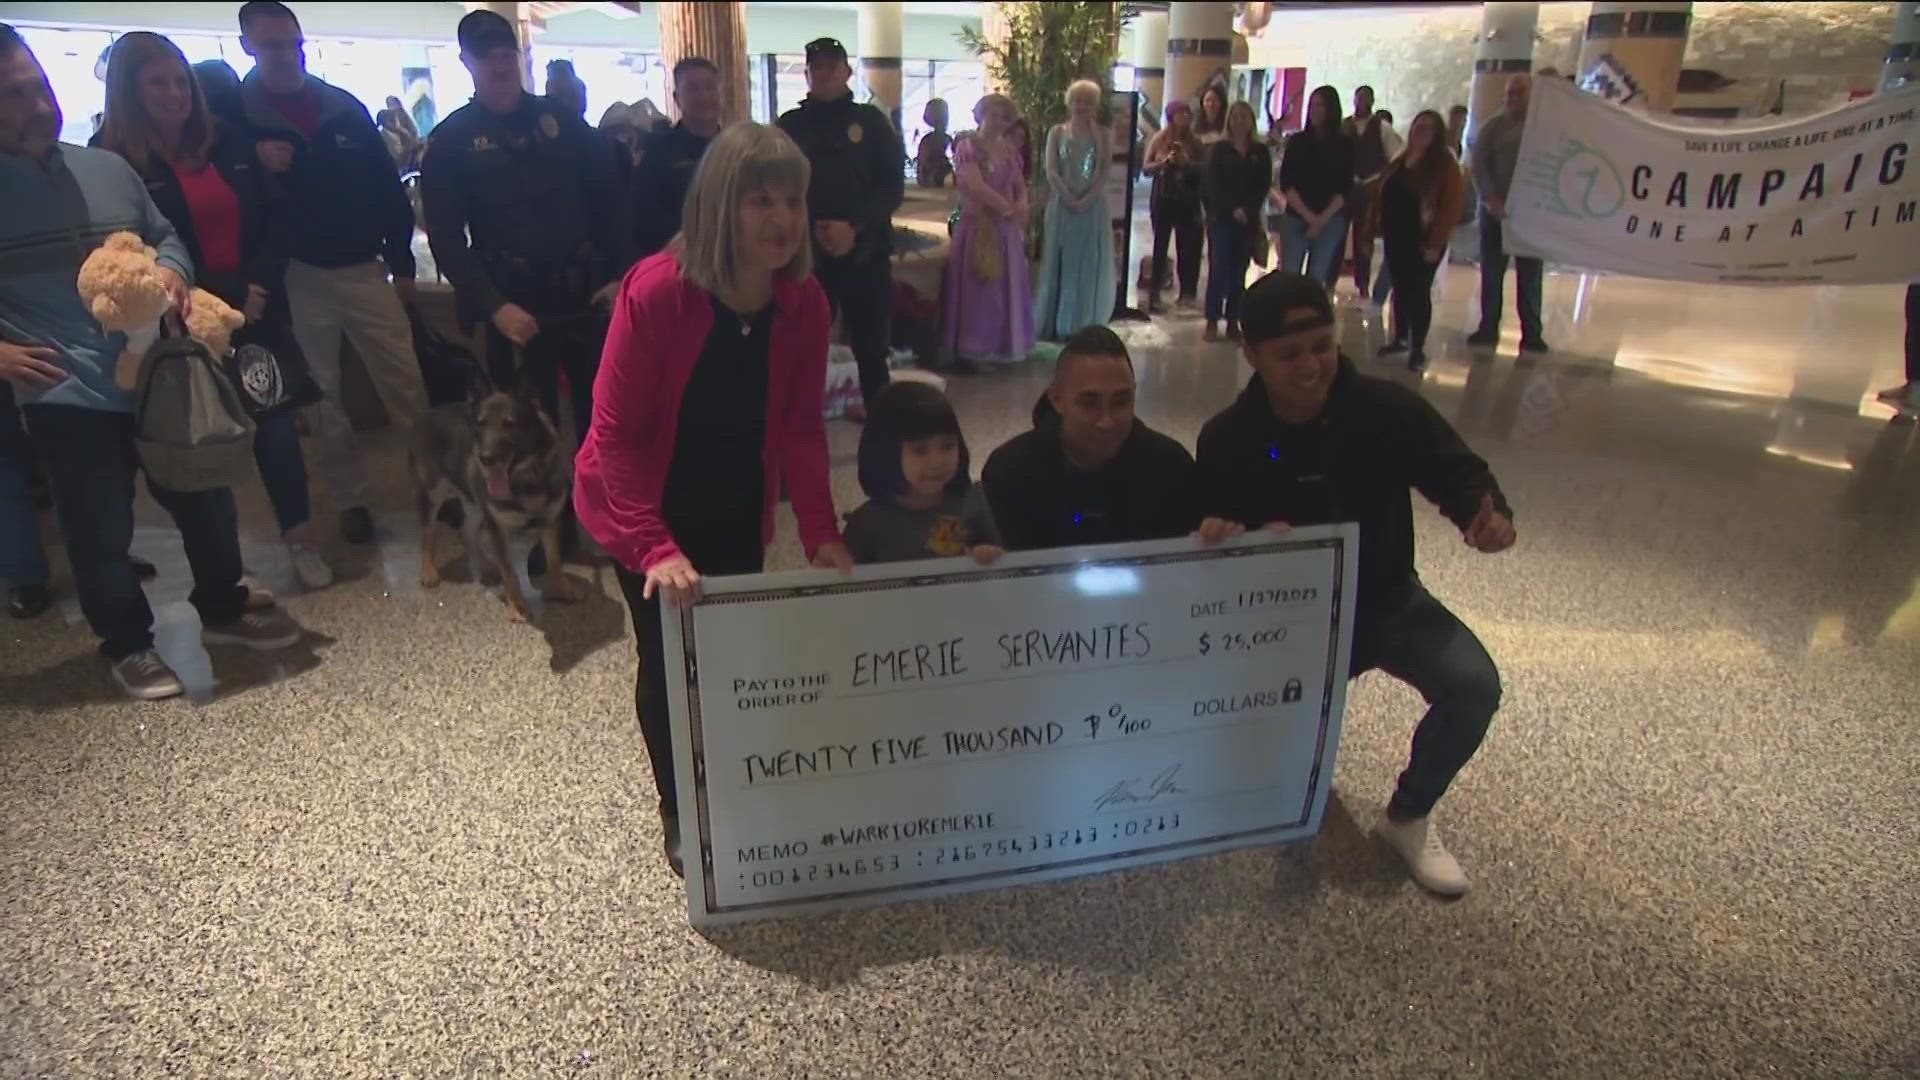 Emerie is five years old and has been battling cancer, and she recently lost her parents. On Friday, she was able to go on her dream trip to Kalahari Resorts.